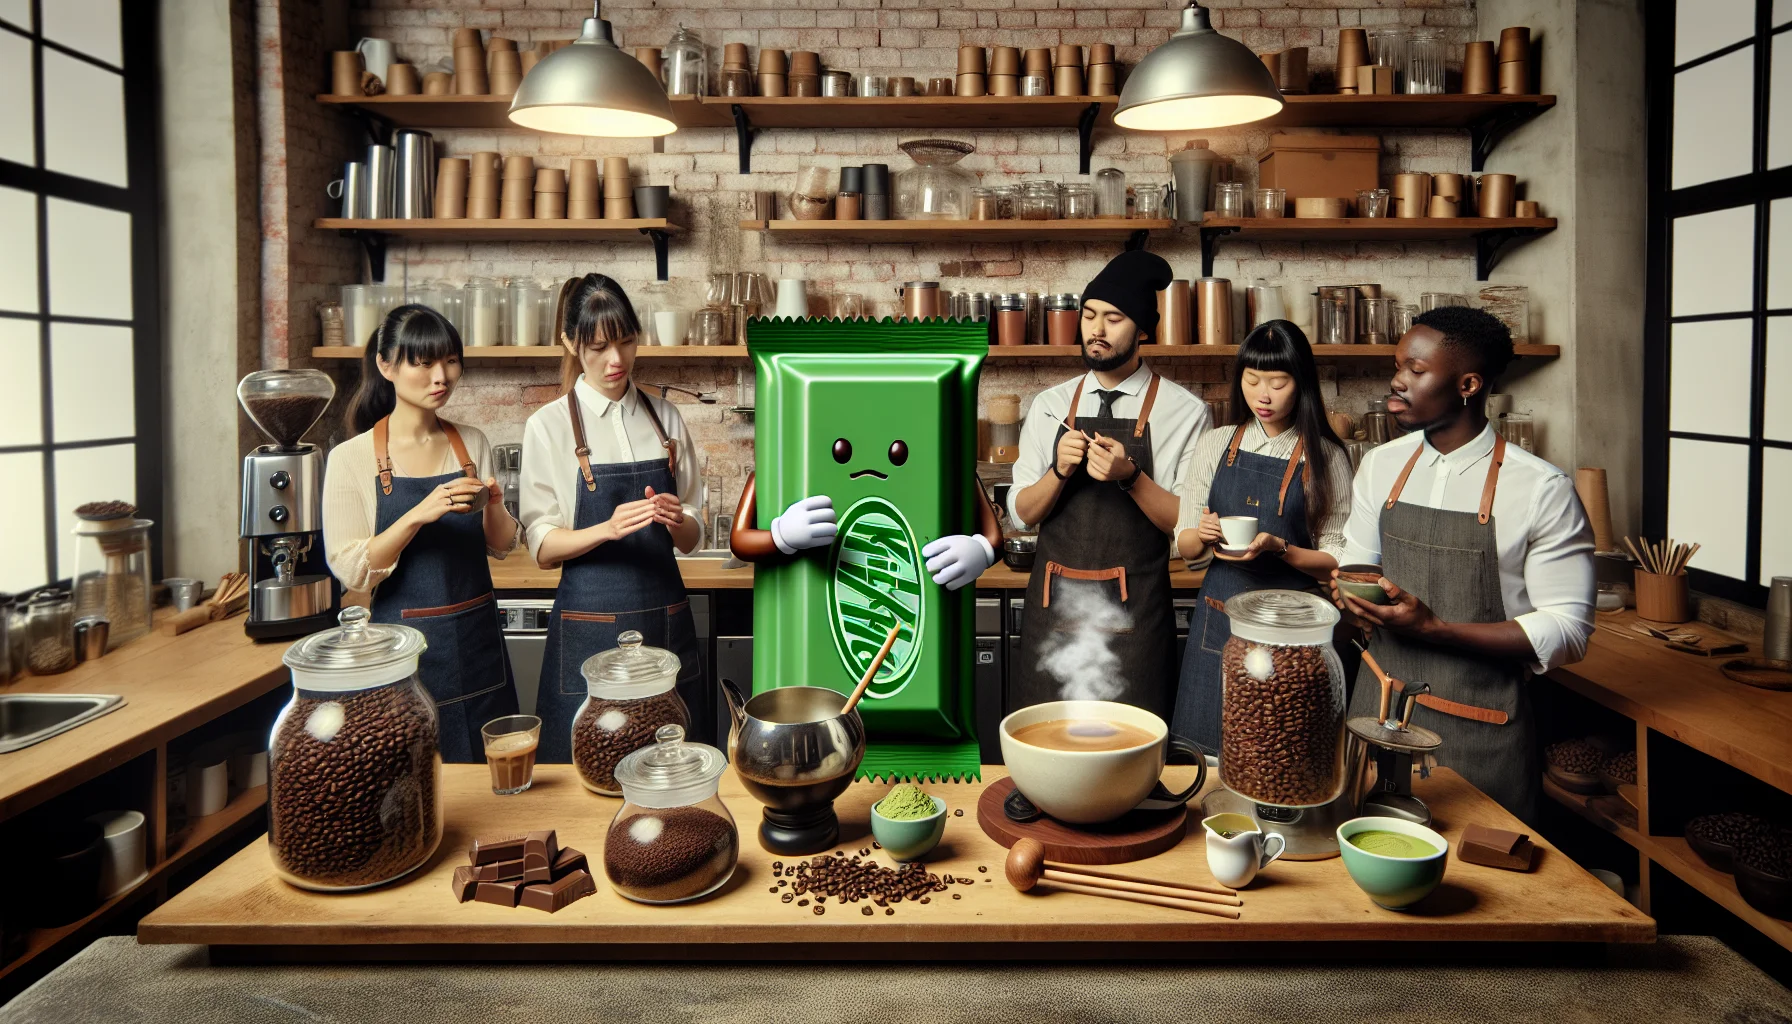 Create a whimsically humorous scene set in a bustling artisan coffee and tea shop. In the center of the scene, prominently displayed is a 'Green Tea Kit-Kat' that has somehow become personified. It's attempting to brew tea and coffee alongside skilled human baristas of different genders and descents, such as a Caucasian female barista, South Asian male barista, and a Black gender-neutral barista, all wearing hipster-style uniforms. Would-be customers, both amused and intrigued, watch this spectacle unfold. The ambiance of the shop is filled with the aroma of freshly ground coffee beans, steamed milk, and the subtle undernotes of matcha. Everywhere, stacks of whole beans, different types of tea leaves, and coffee-making equipment contribute to this playful scene.